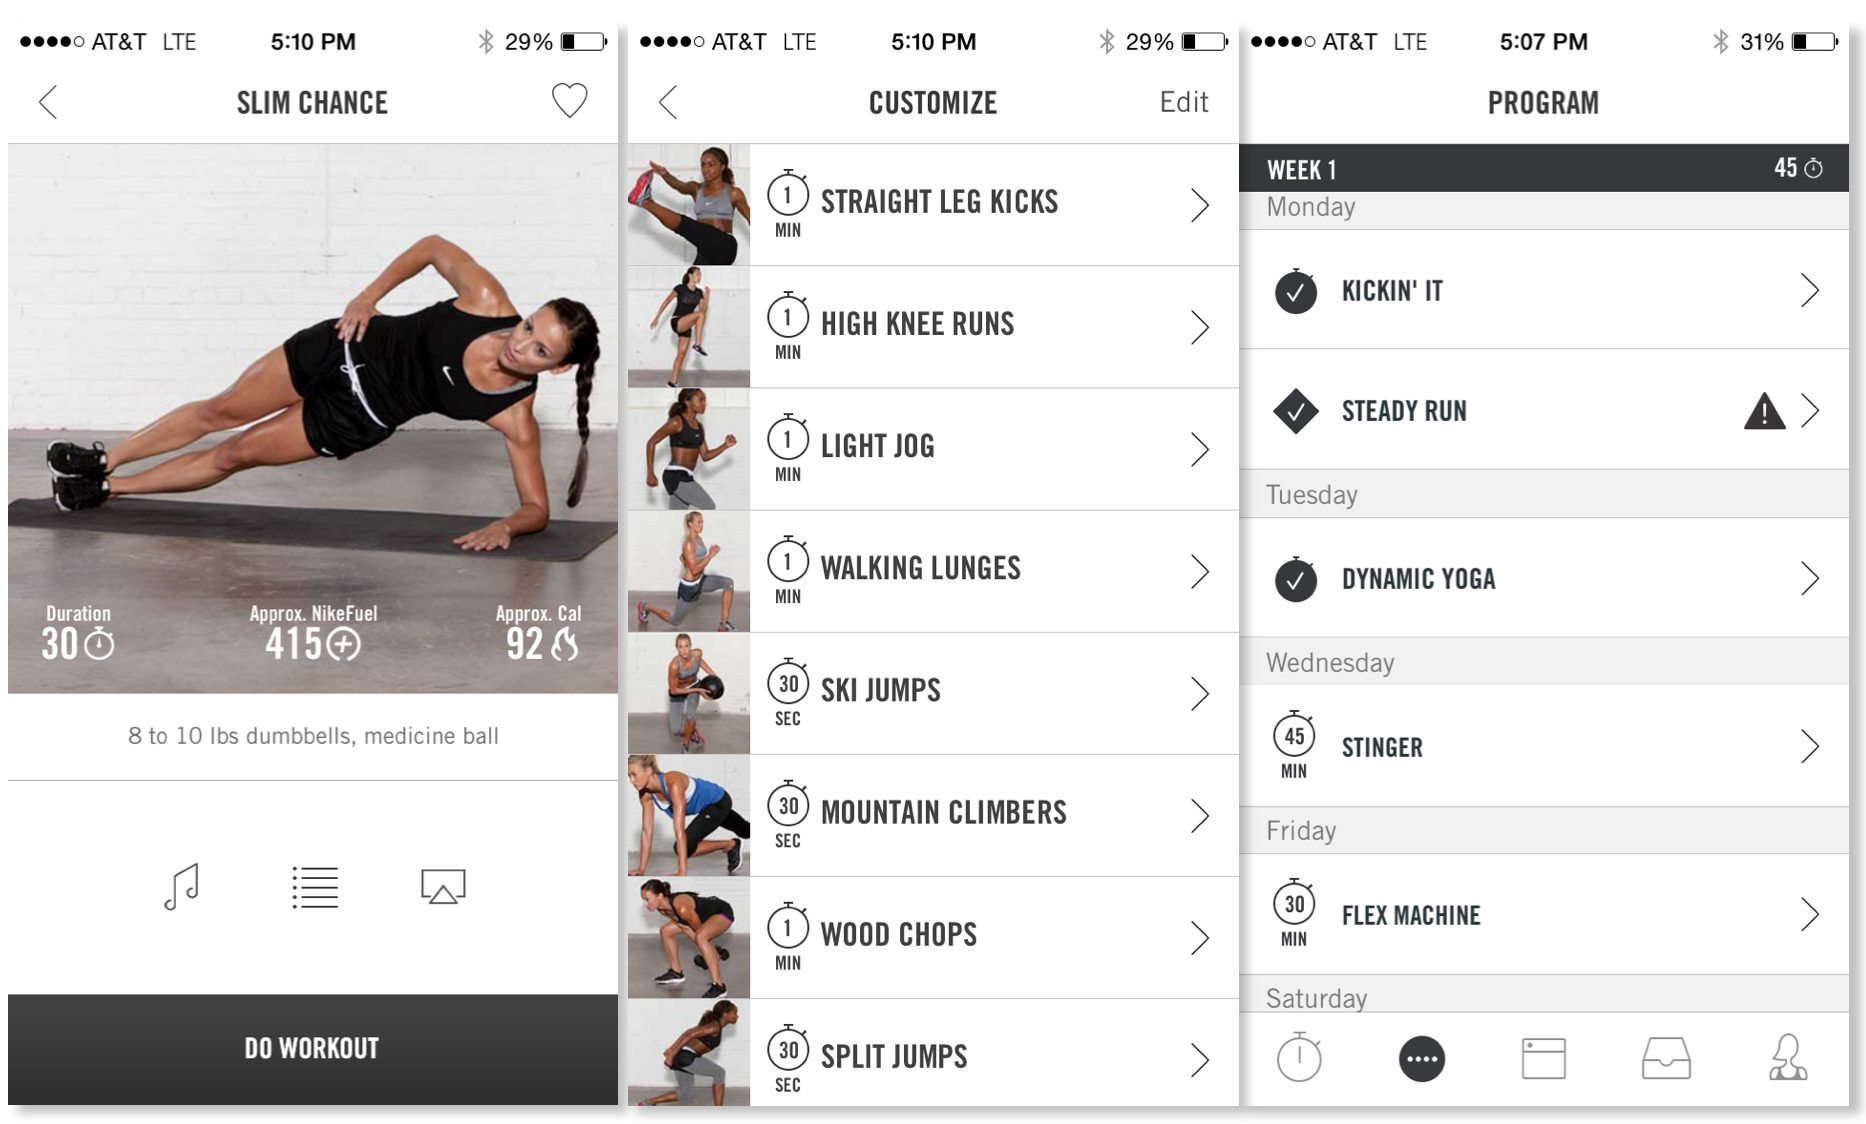 30 Minute Wedding Workout App for Push Pull Legs